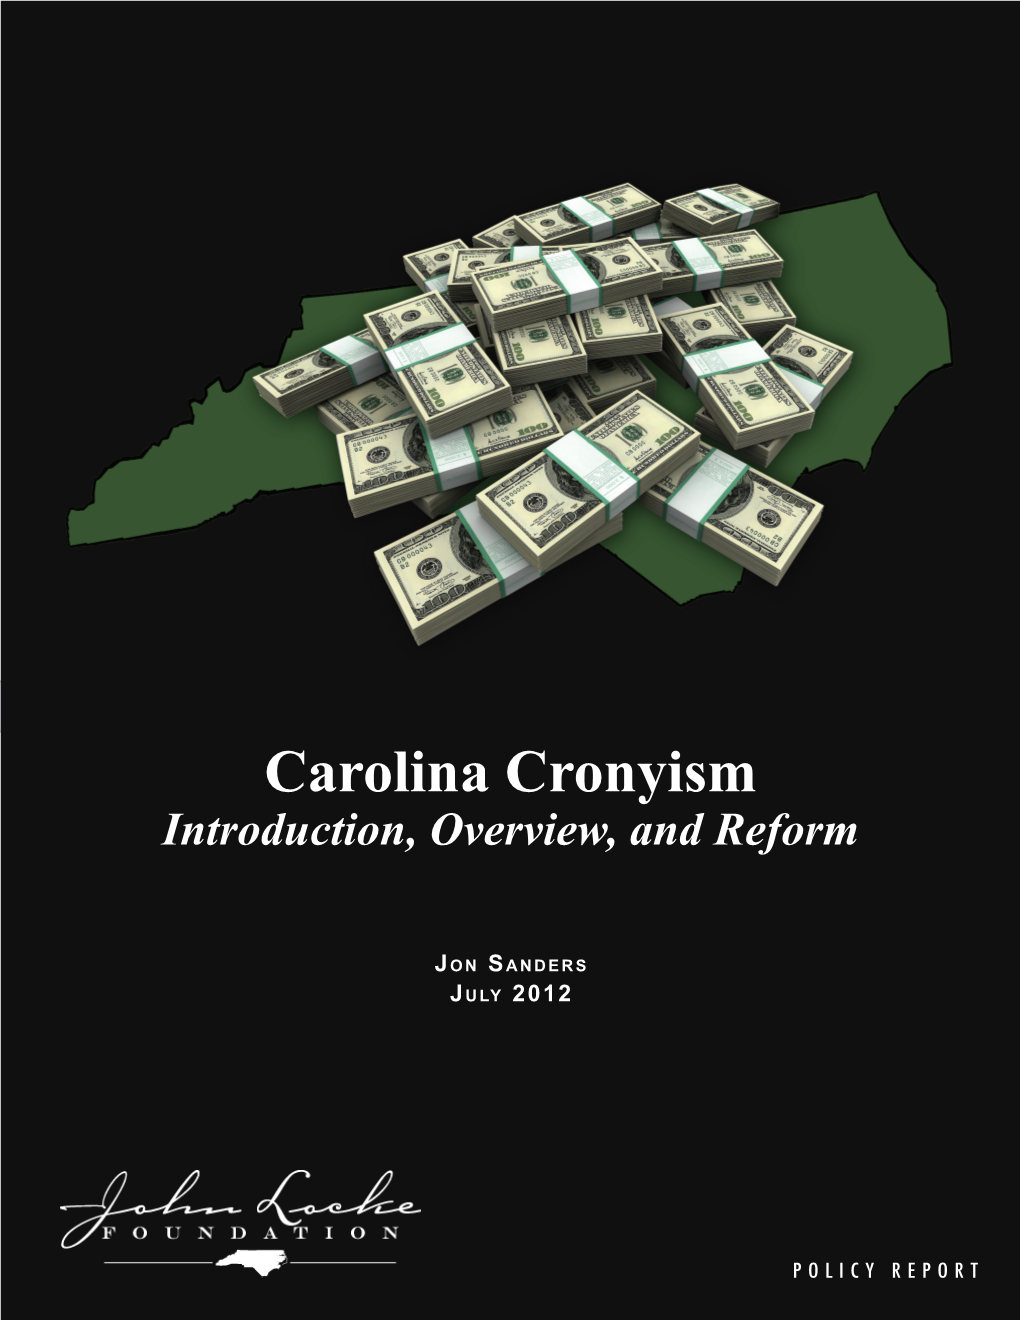 Carolina Cronyism Introduction, Overview, and Reform